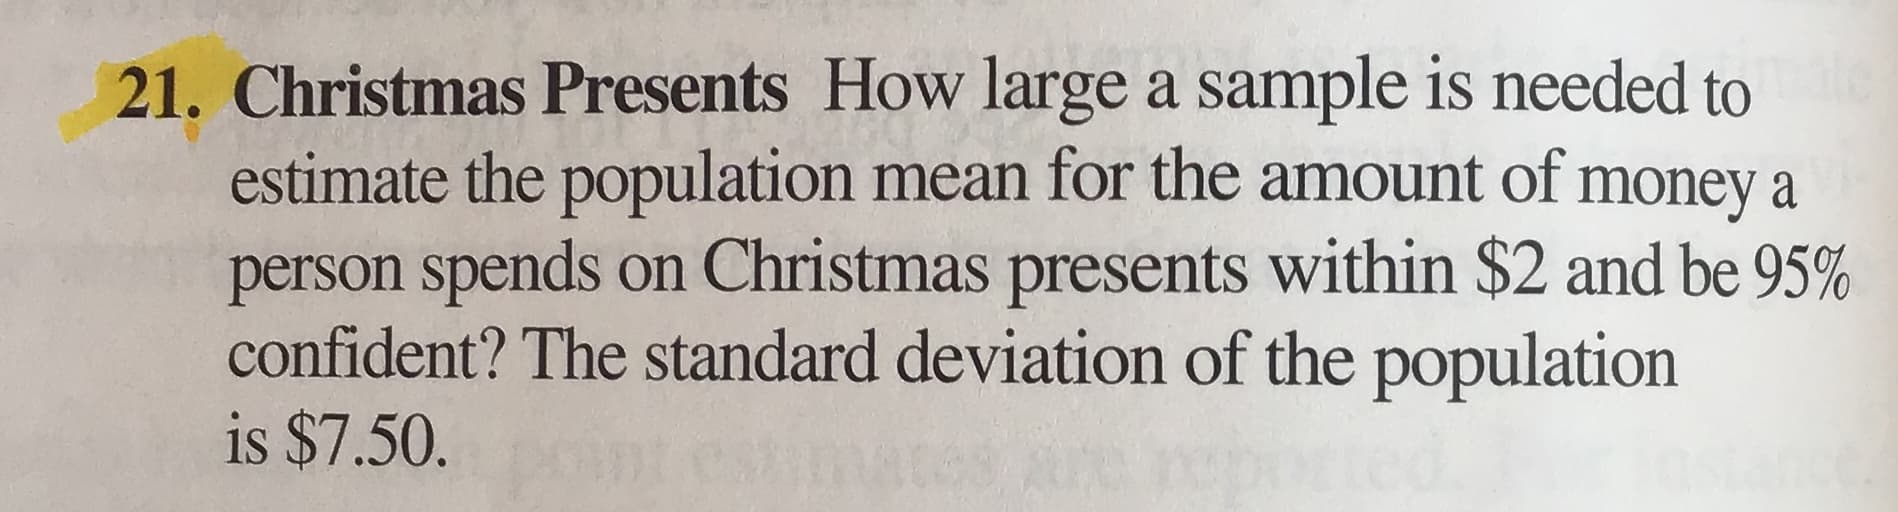 Christmas Presents How large a sample is needed to
estimate the population mean for the amount of money a
person spends on Christmas presents within $2 and be 95%
confident? The standard deviation of the population
is $7.50.
